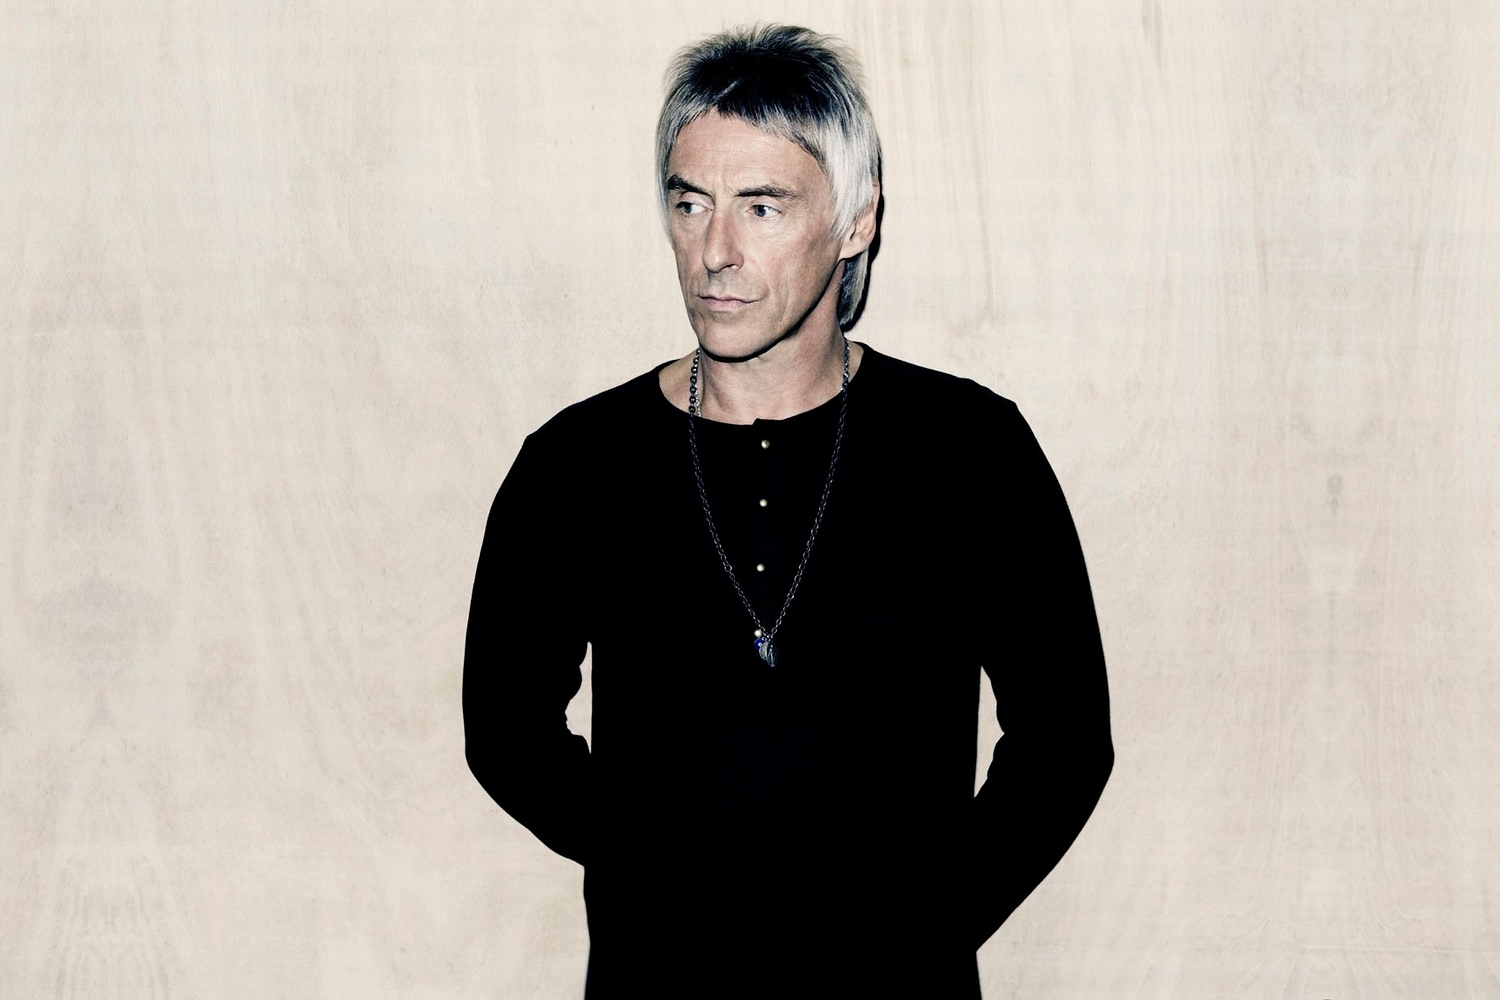 Paul Weller criticises David Cameron for stating he’s a fan of The Jam’s ‘Eton Rifles’